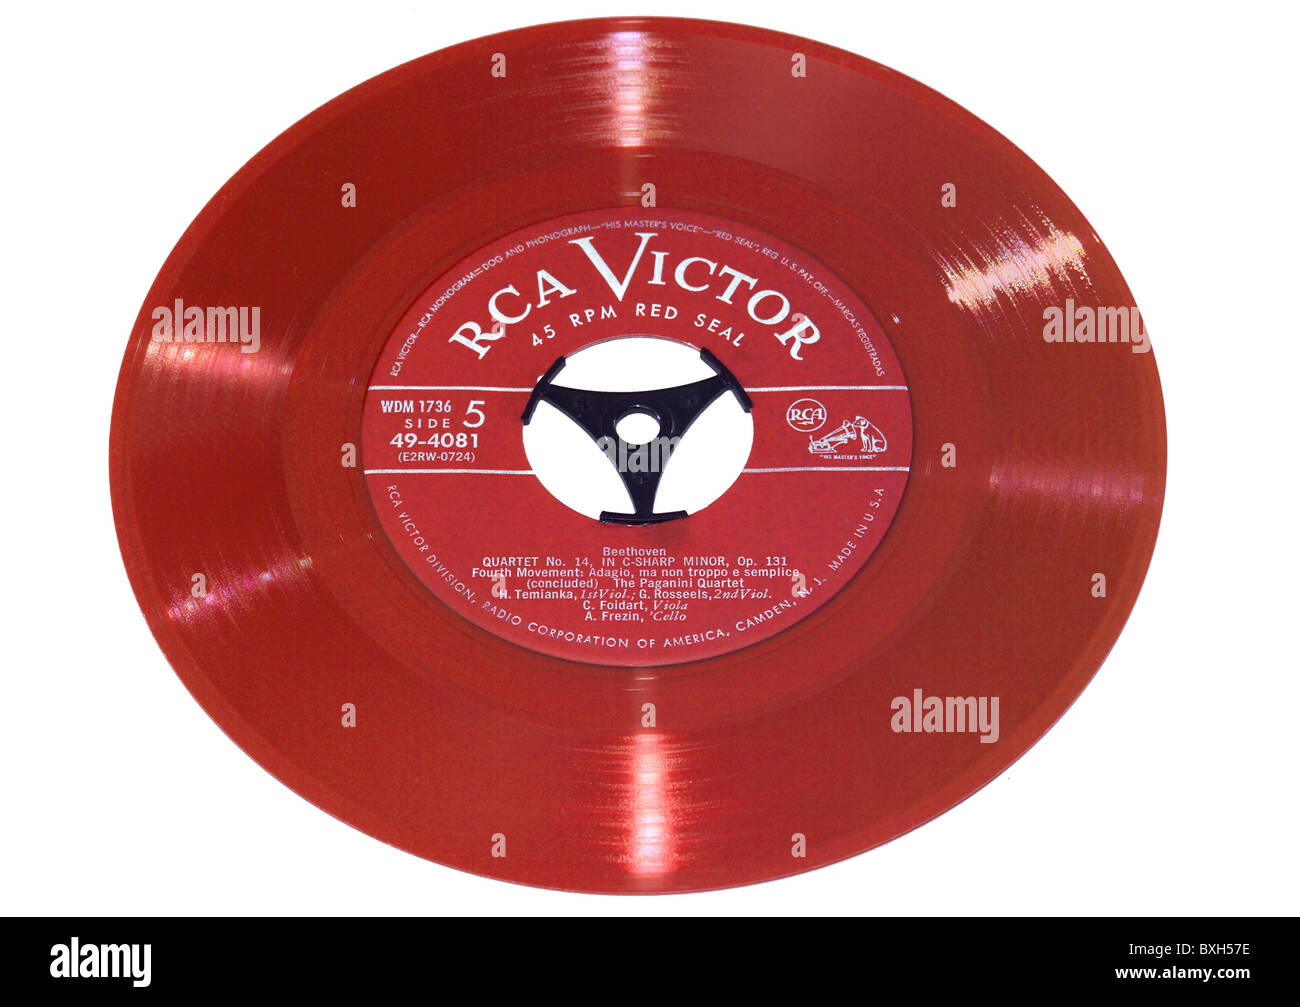 Rca victor red seal records hi-res stock and images - Alamy